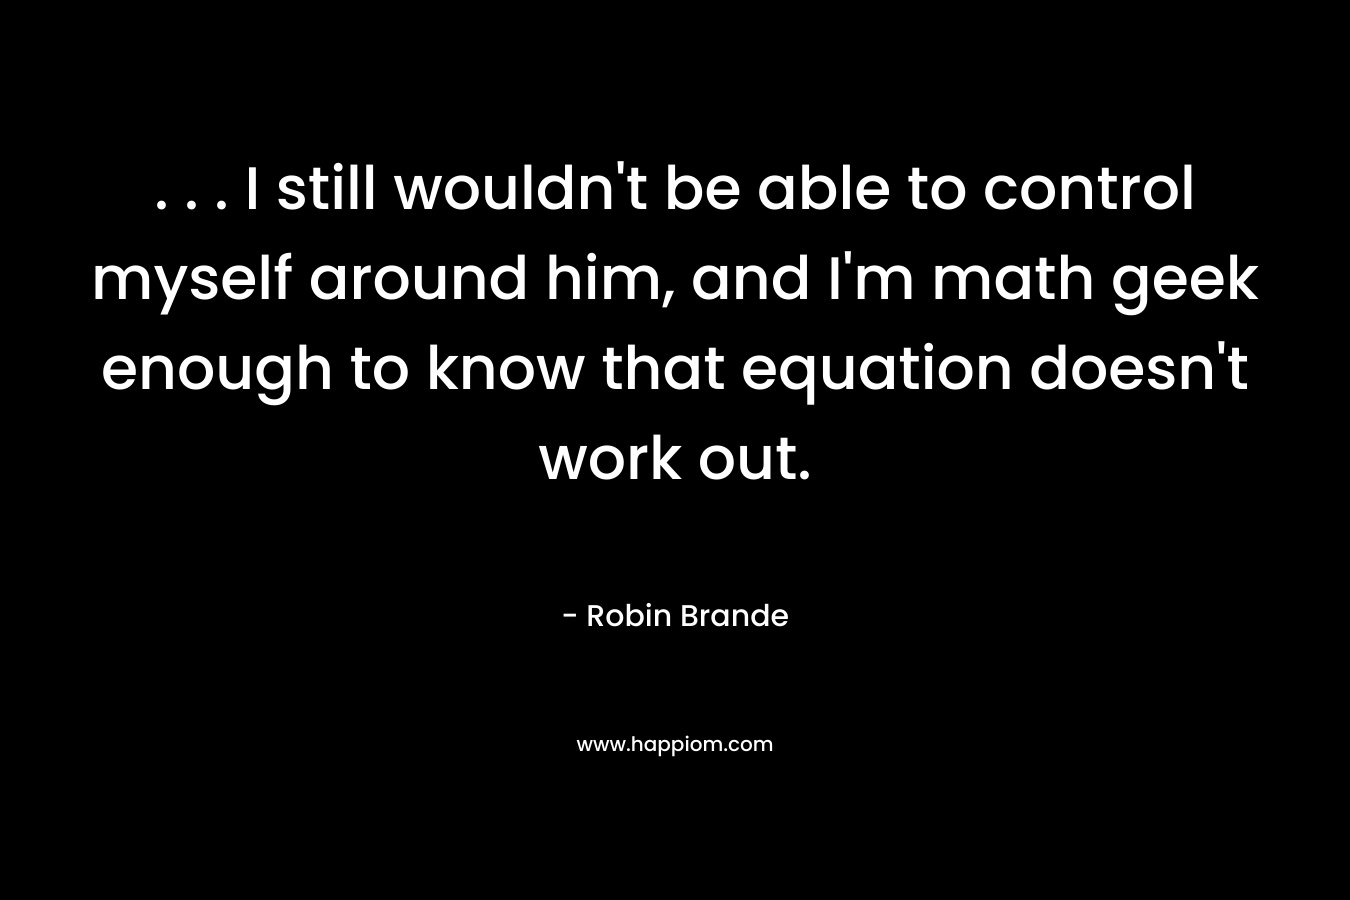 . . . I still wouldn’t be able to control myself around him, and I’m math geek enough to know that equation doesn’t work out. – Robin Brande